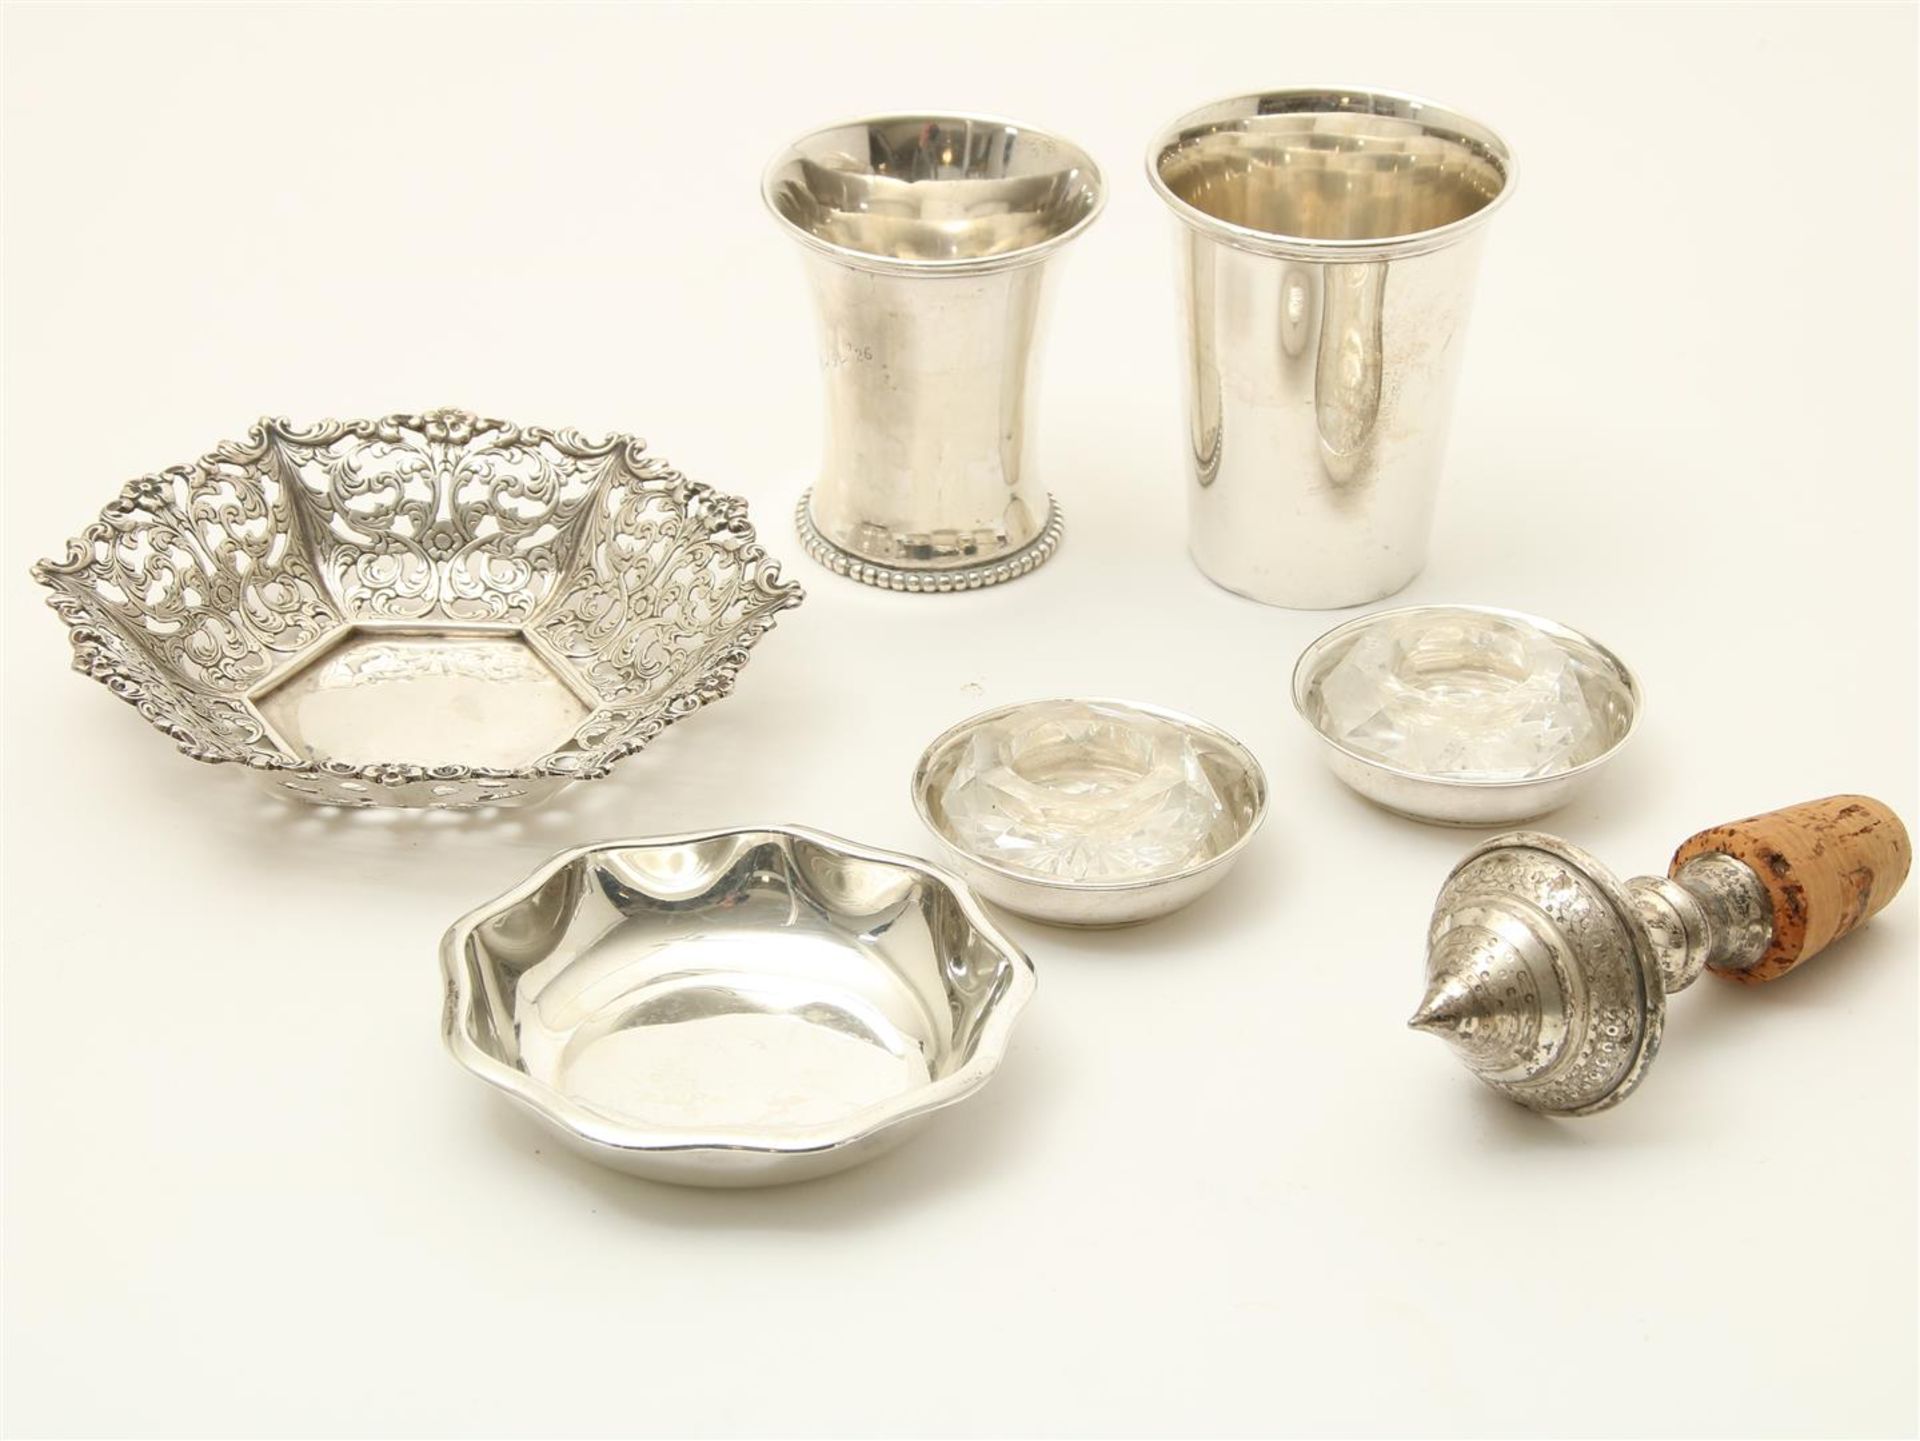 Lot of various silver, including children's cup, bottle stopper and salt cellars with crystal, gross